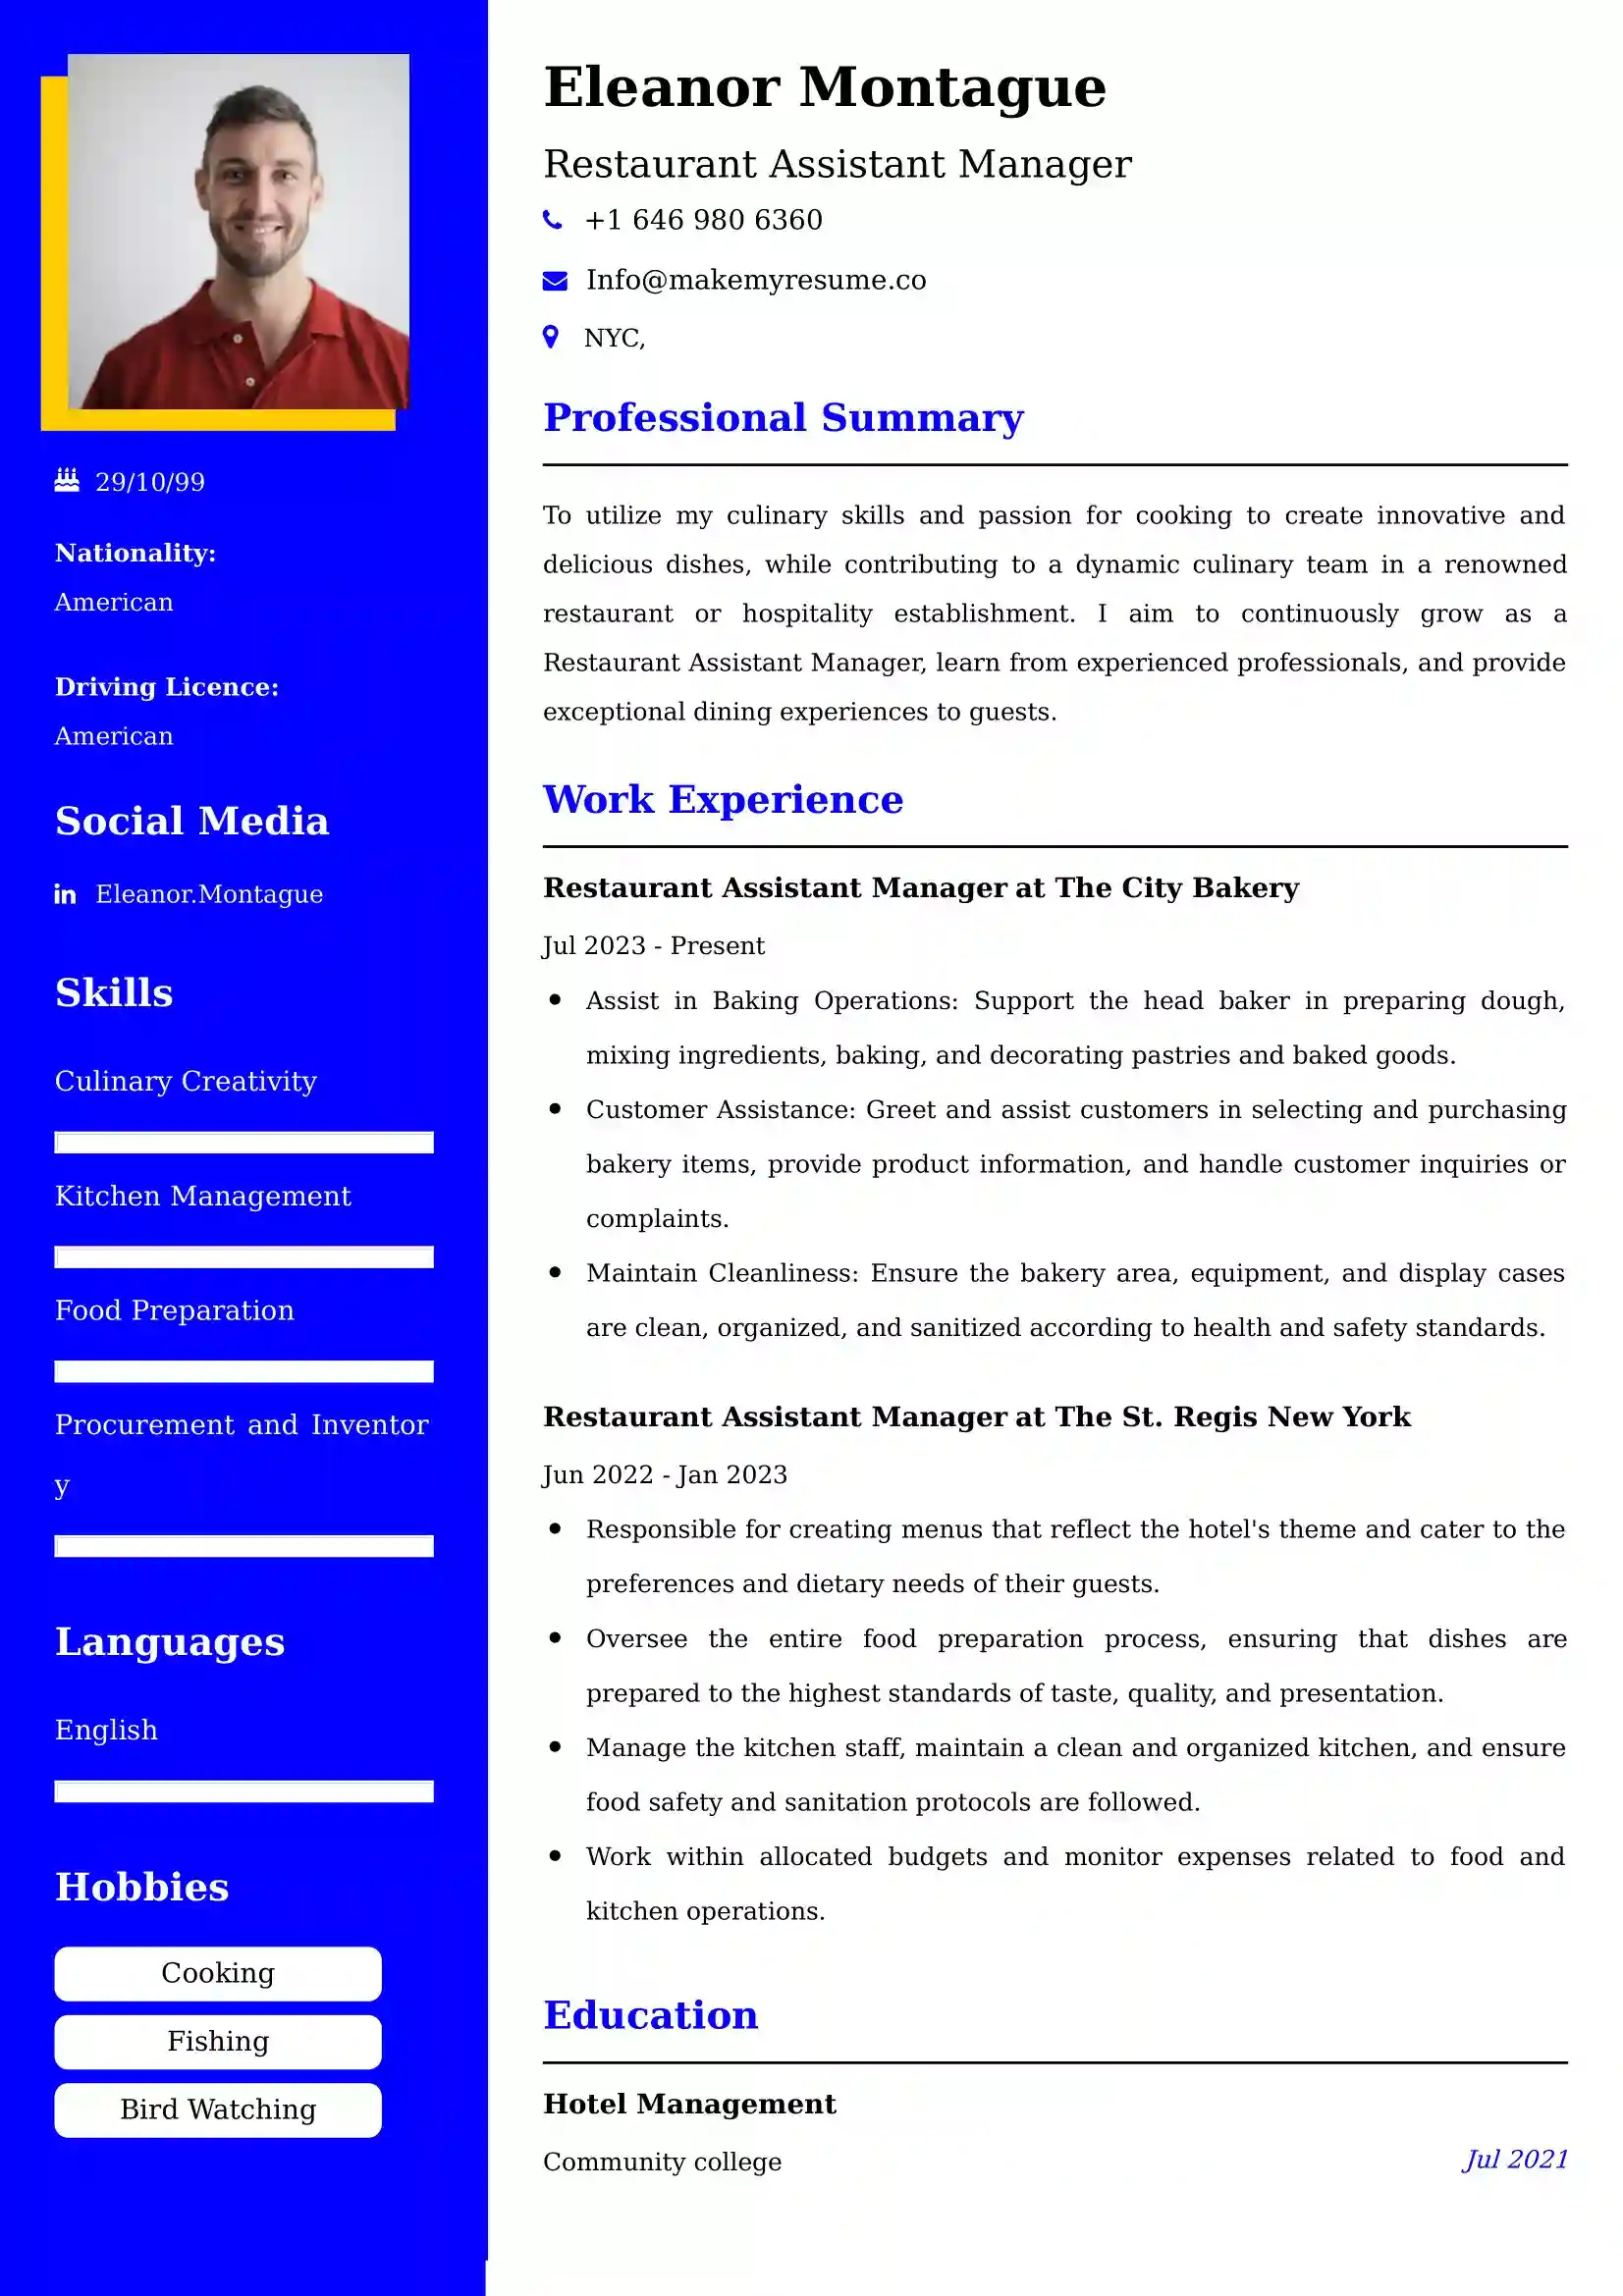 Restaurant Assistant Manager Resume Examples - UK Format, Latest Template.